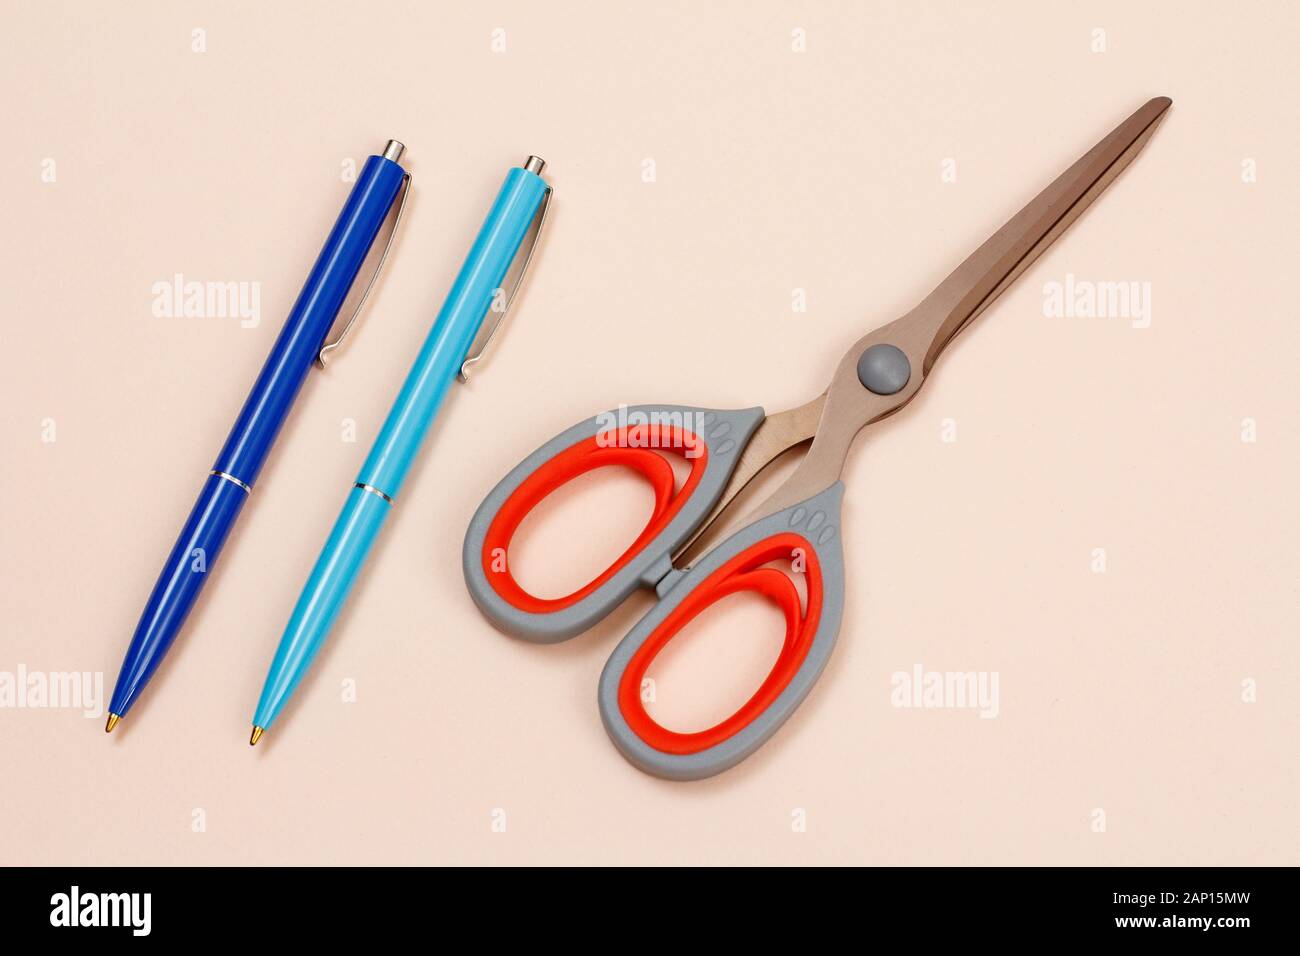 Two blue pens and scissors on a beige background. Top view. Stock Photo